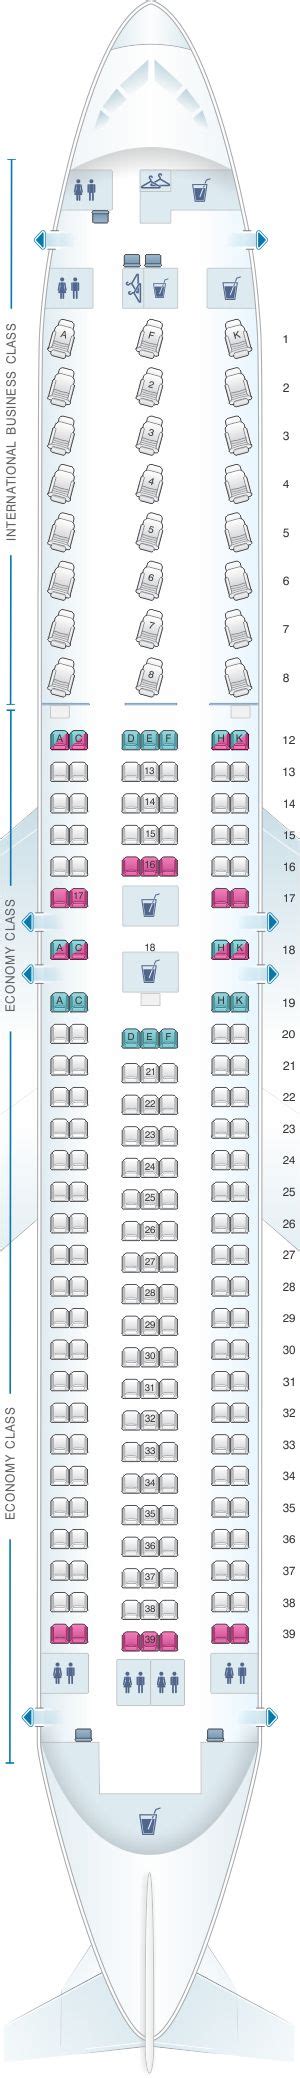 Seat Map Air Canada Boeing B767 300ER 763 Boeing Airlines Seating